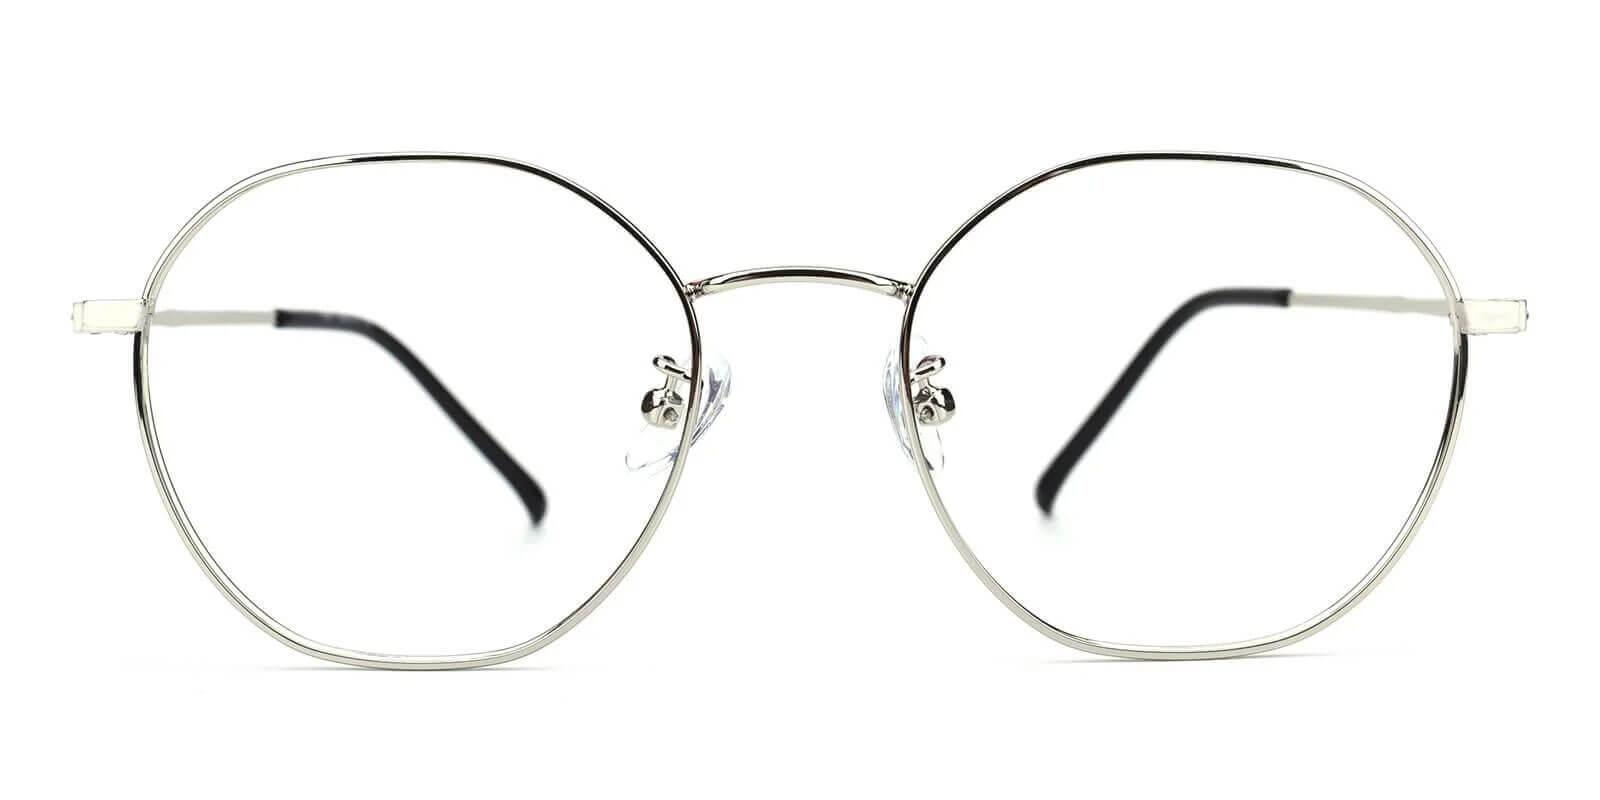 Singapore Silver Metal Eyeglasses , Lightweight , NosePads Frames from ABBE Glasses